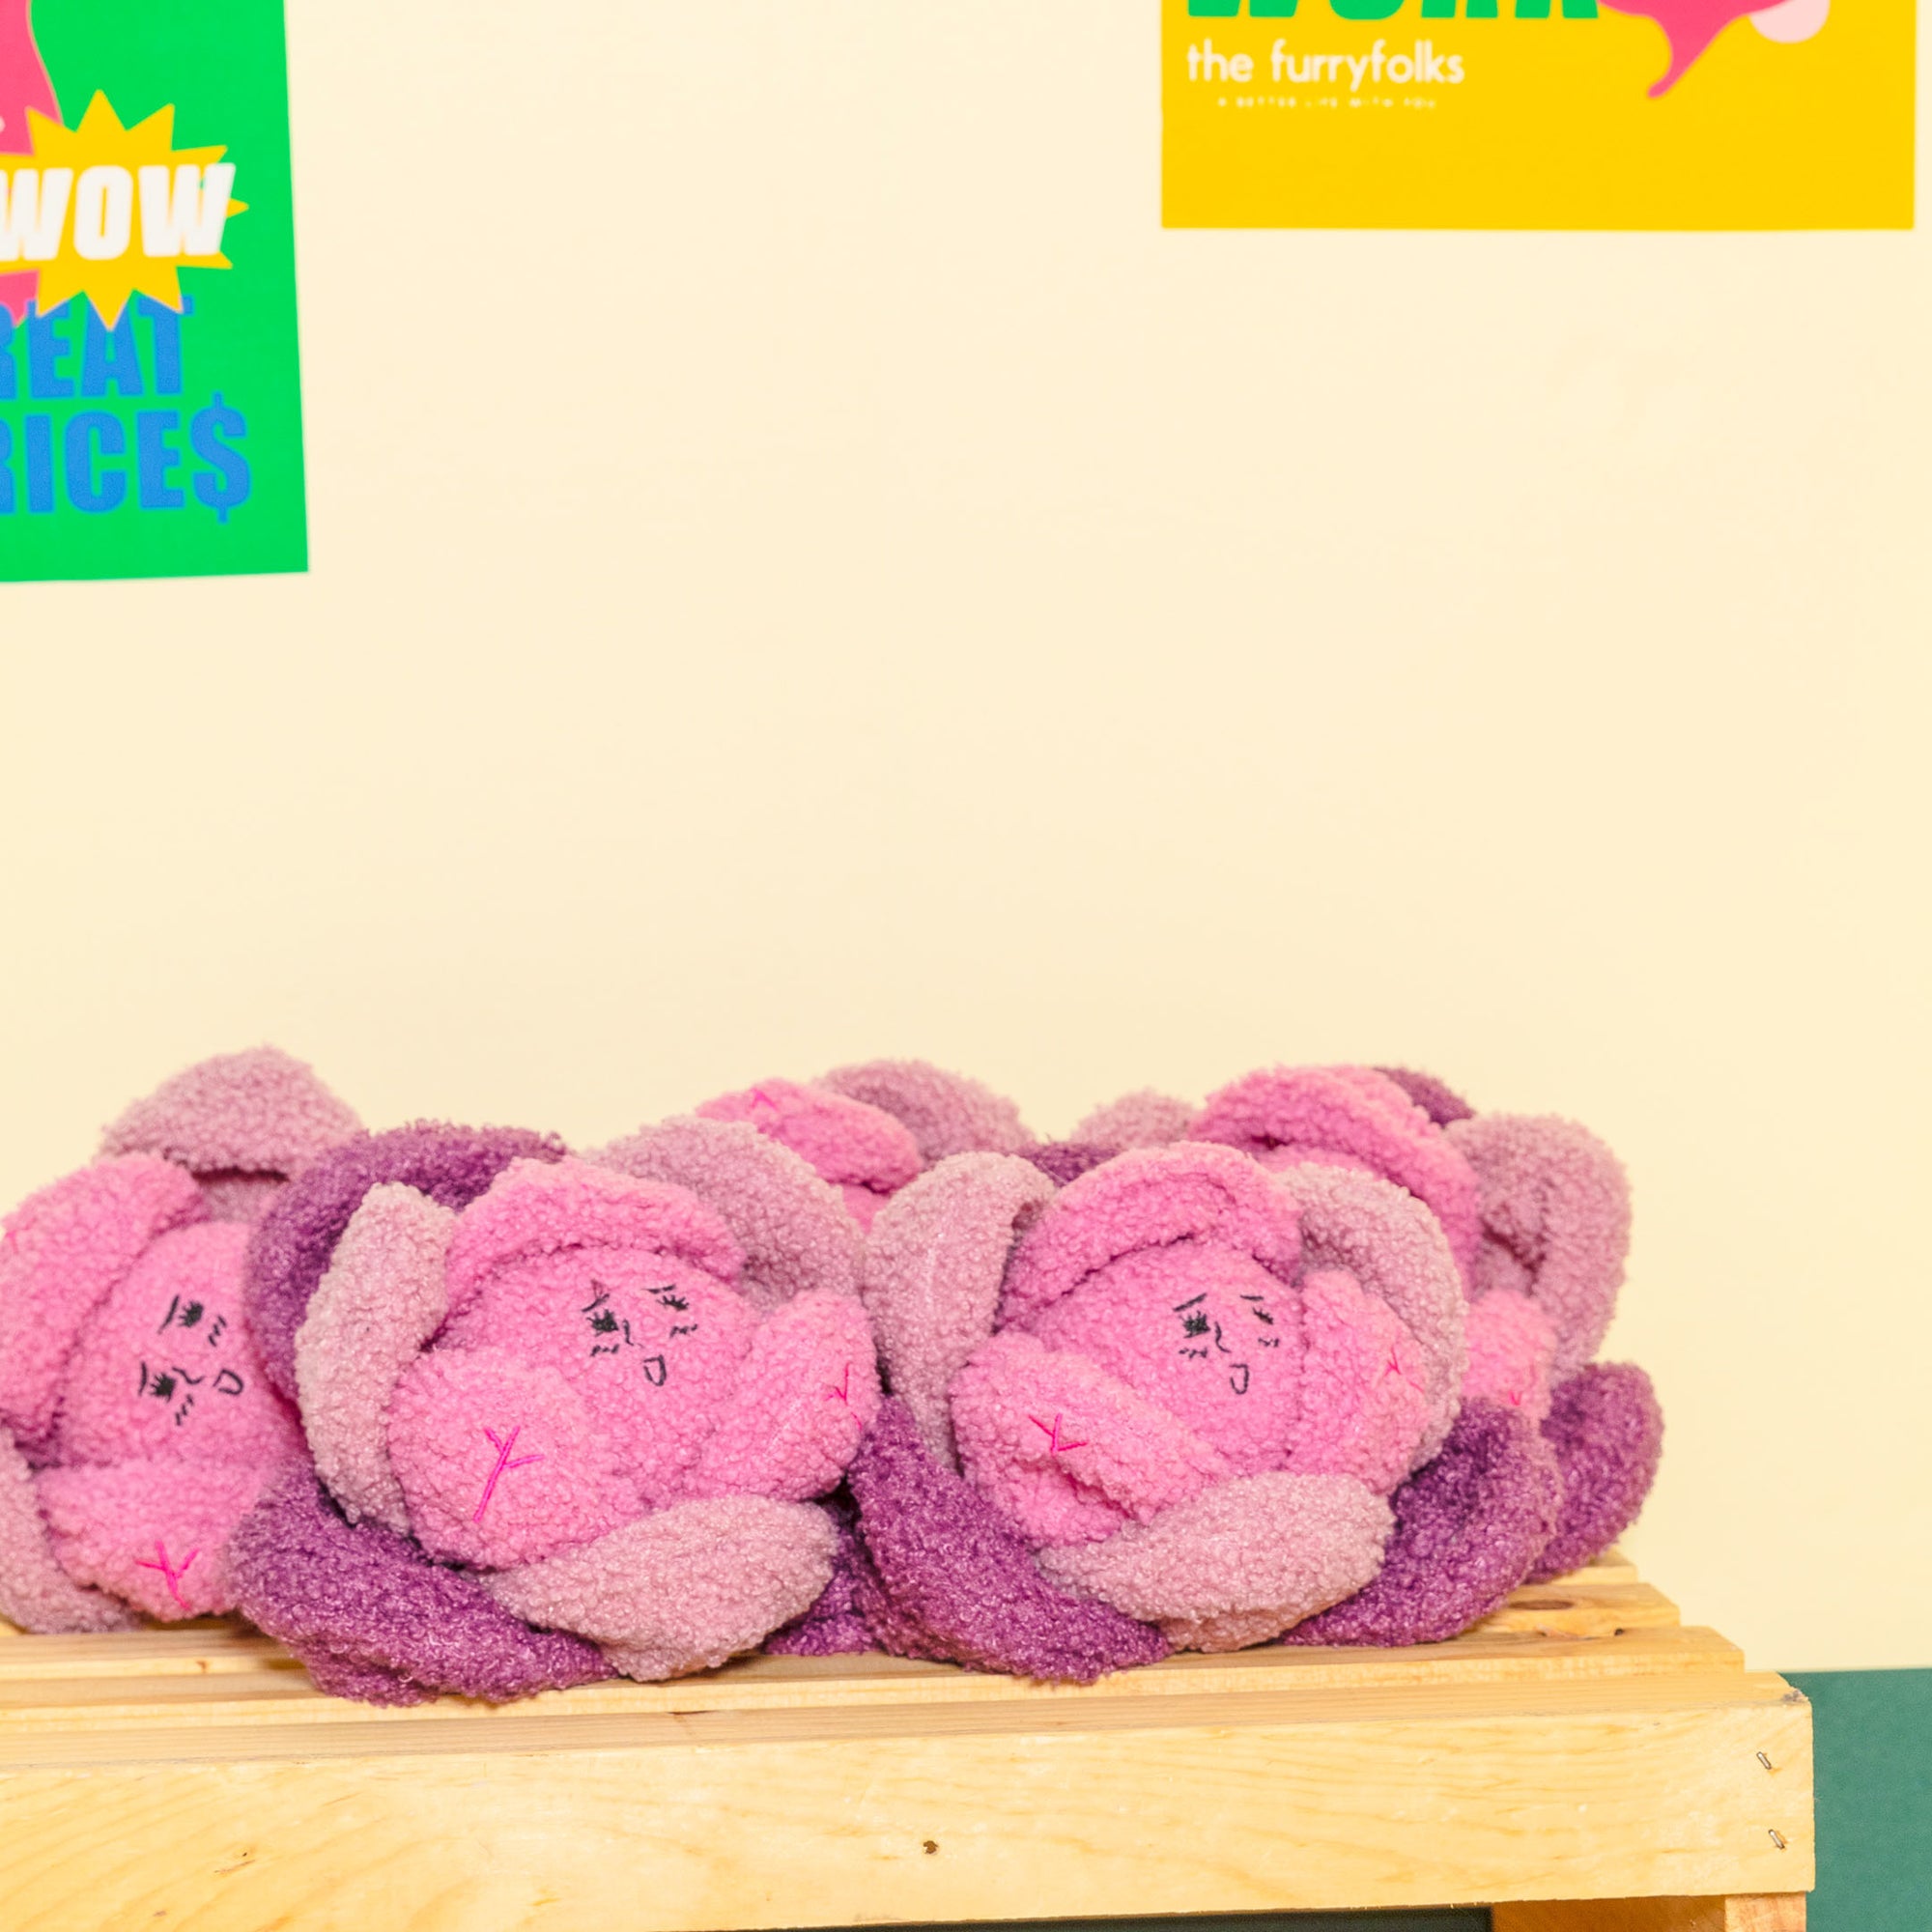 The photo shows a collection of plush Red Cabbage toys in pink and purple, arranged on a wooden platform with promotional posters in the background. The posters feature phrases like "WOW GREAT PRICES" and branding for "the furryfolks", hinting at a sale or event for pet products. The setting suggests a fun and engaging shopping experience aimed at pet owners. The beige and green wall colors complement the toys' vibrant hues, creating a cheerful and inviting atmosphere.